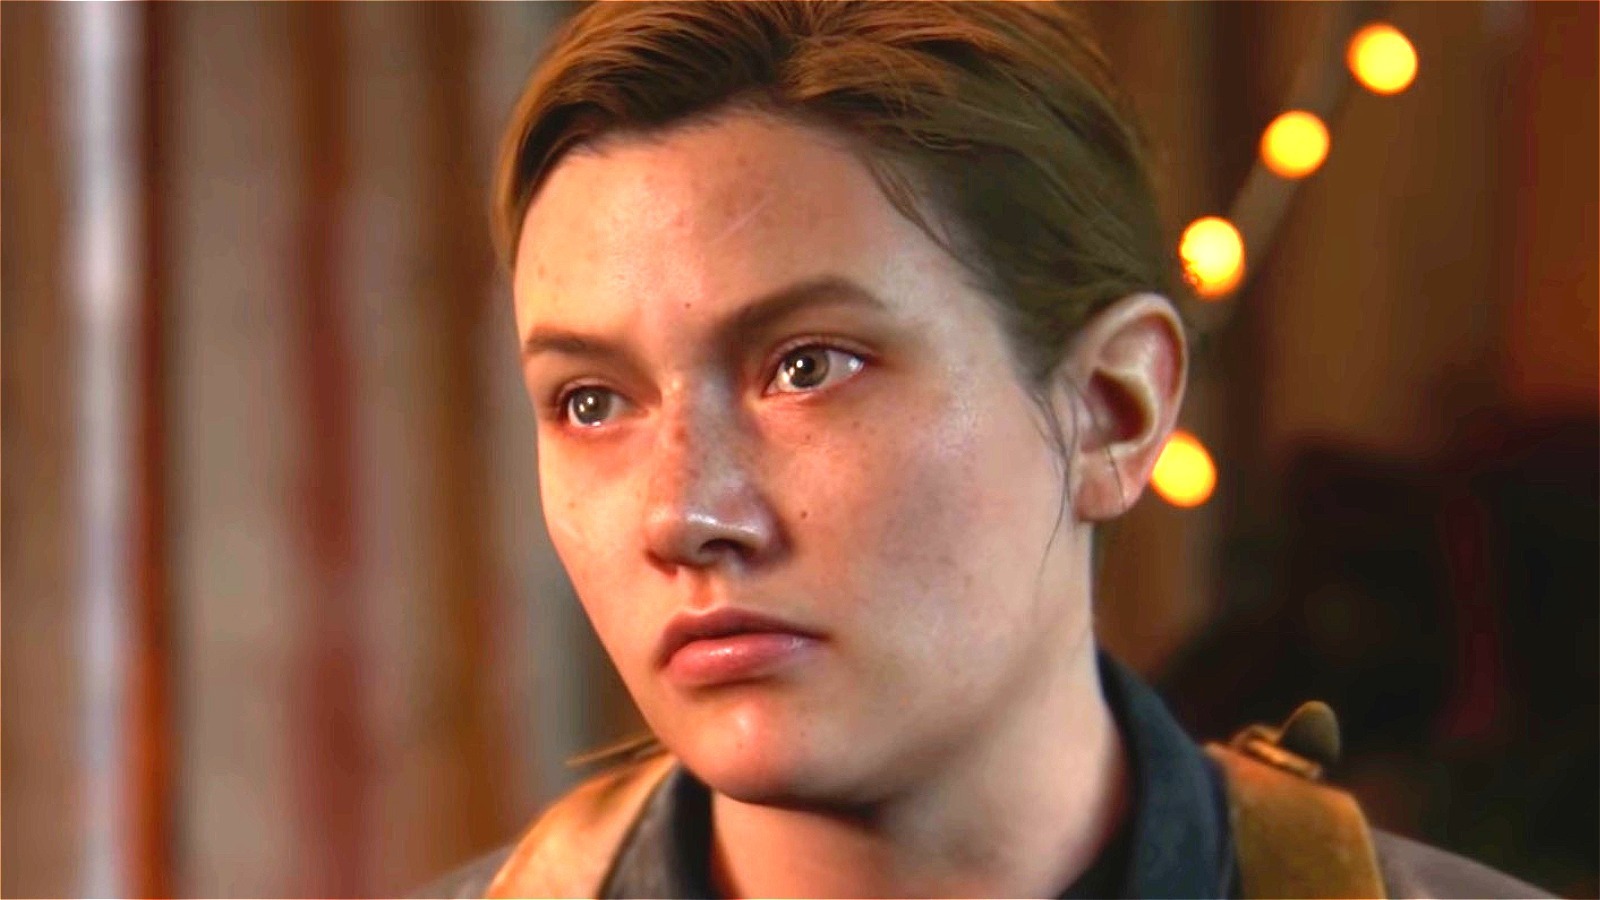 The Actress Who Plays Abby In The Last Of Us: Part 2 Is Gorgeous